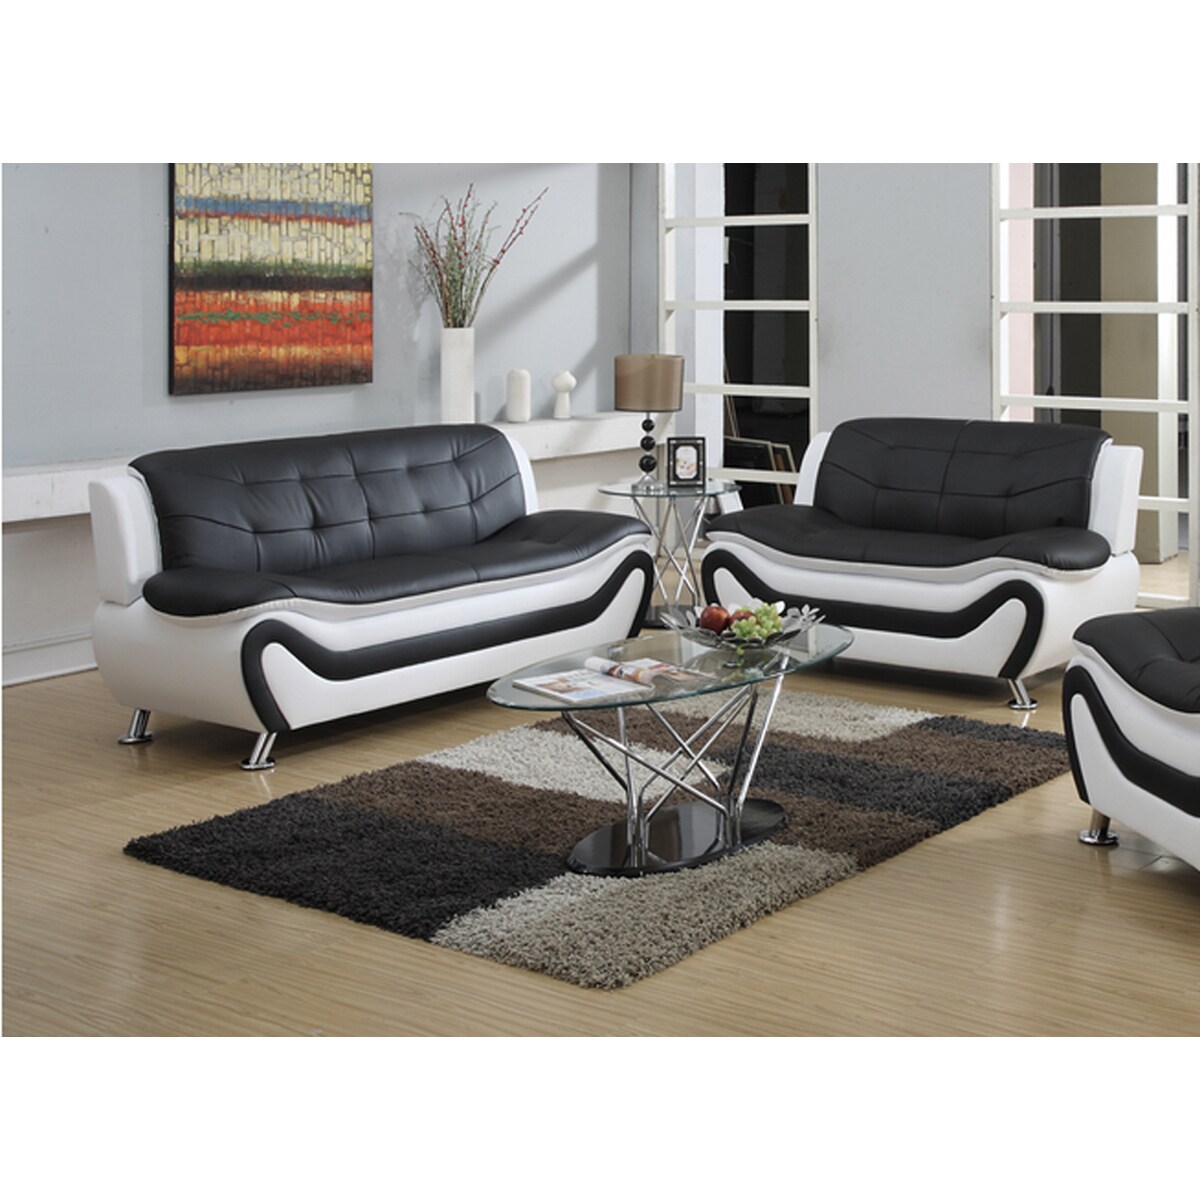 2Pc Contemporary Modern Leather Sofa & Loveseat Set Living Room Furniture 